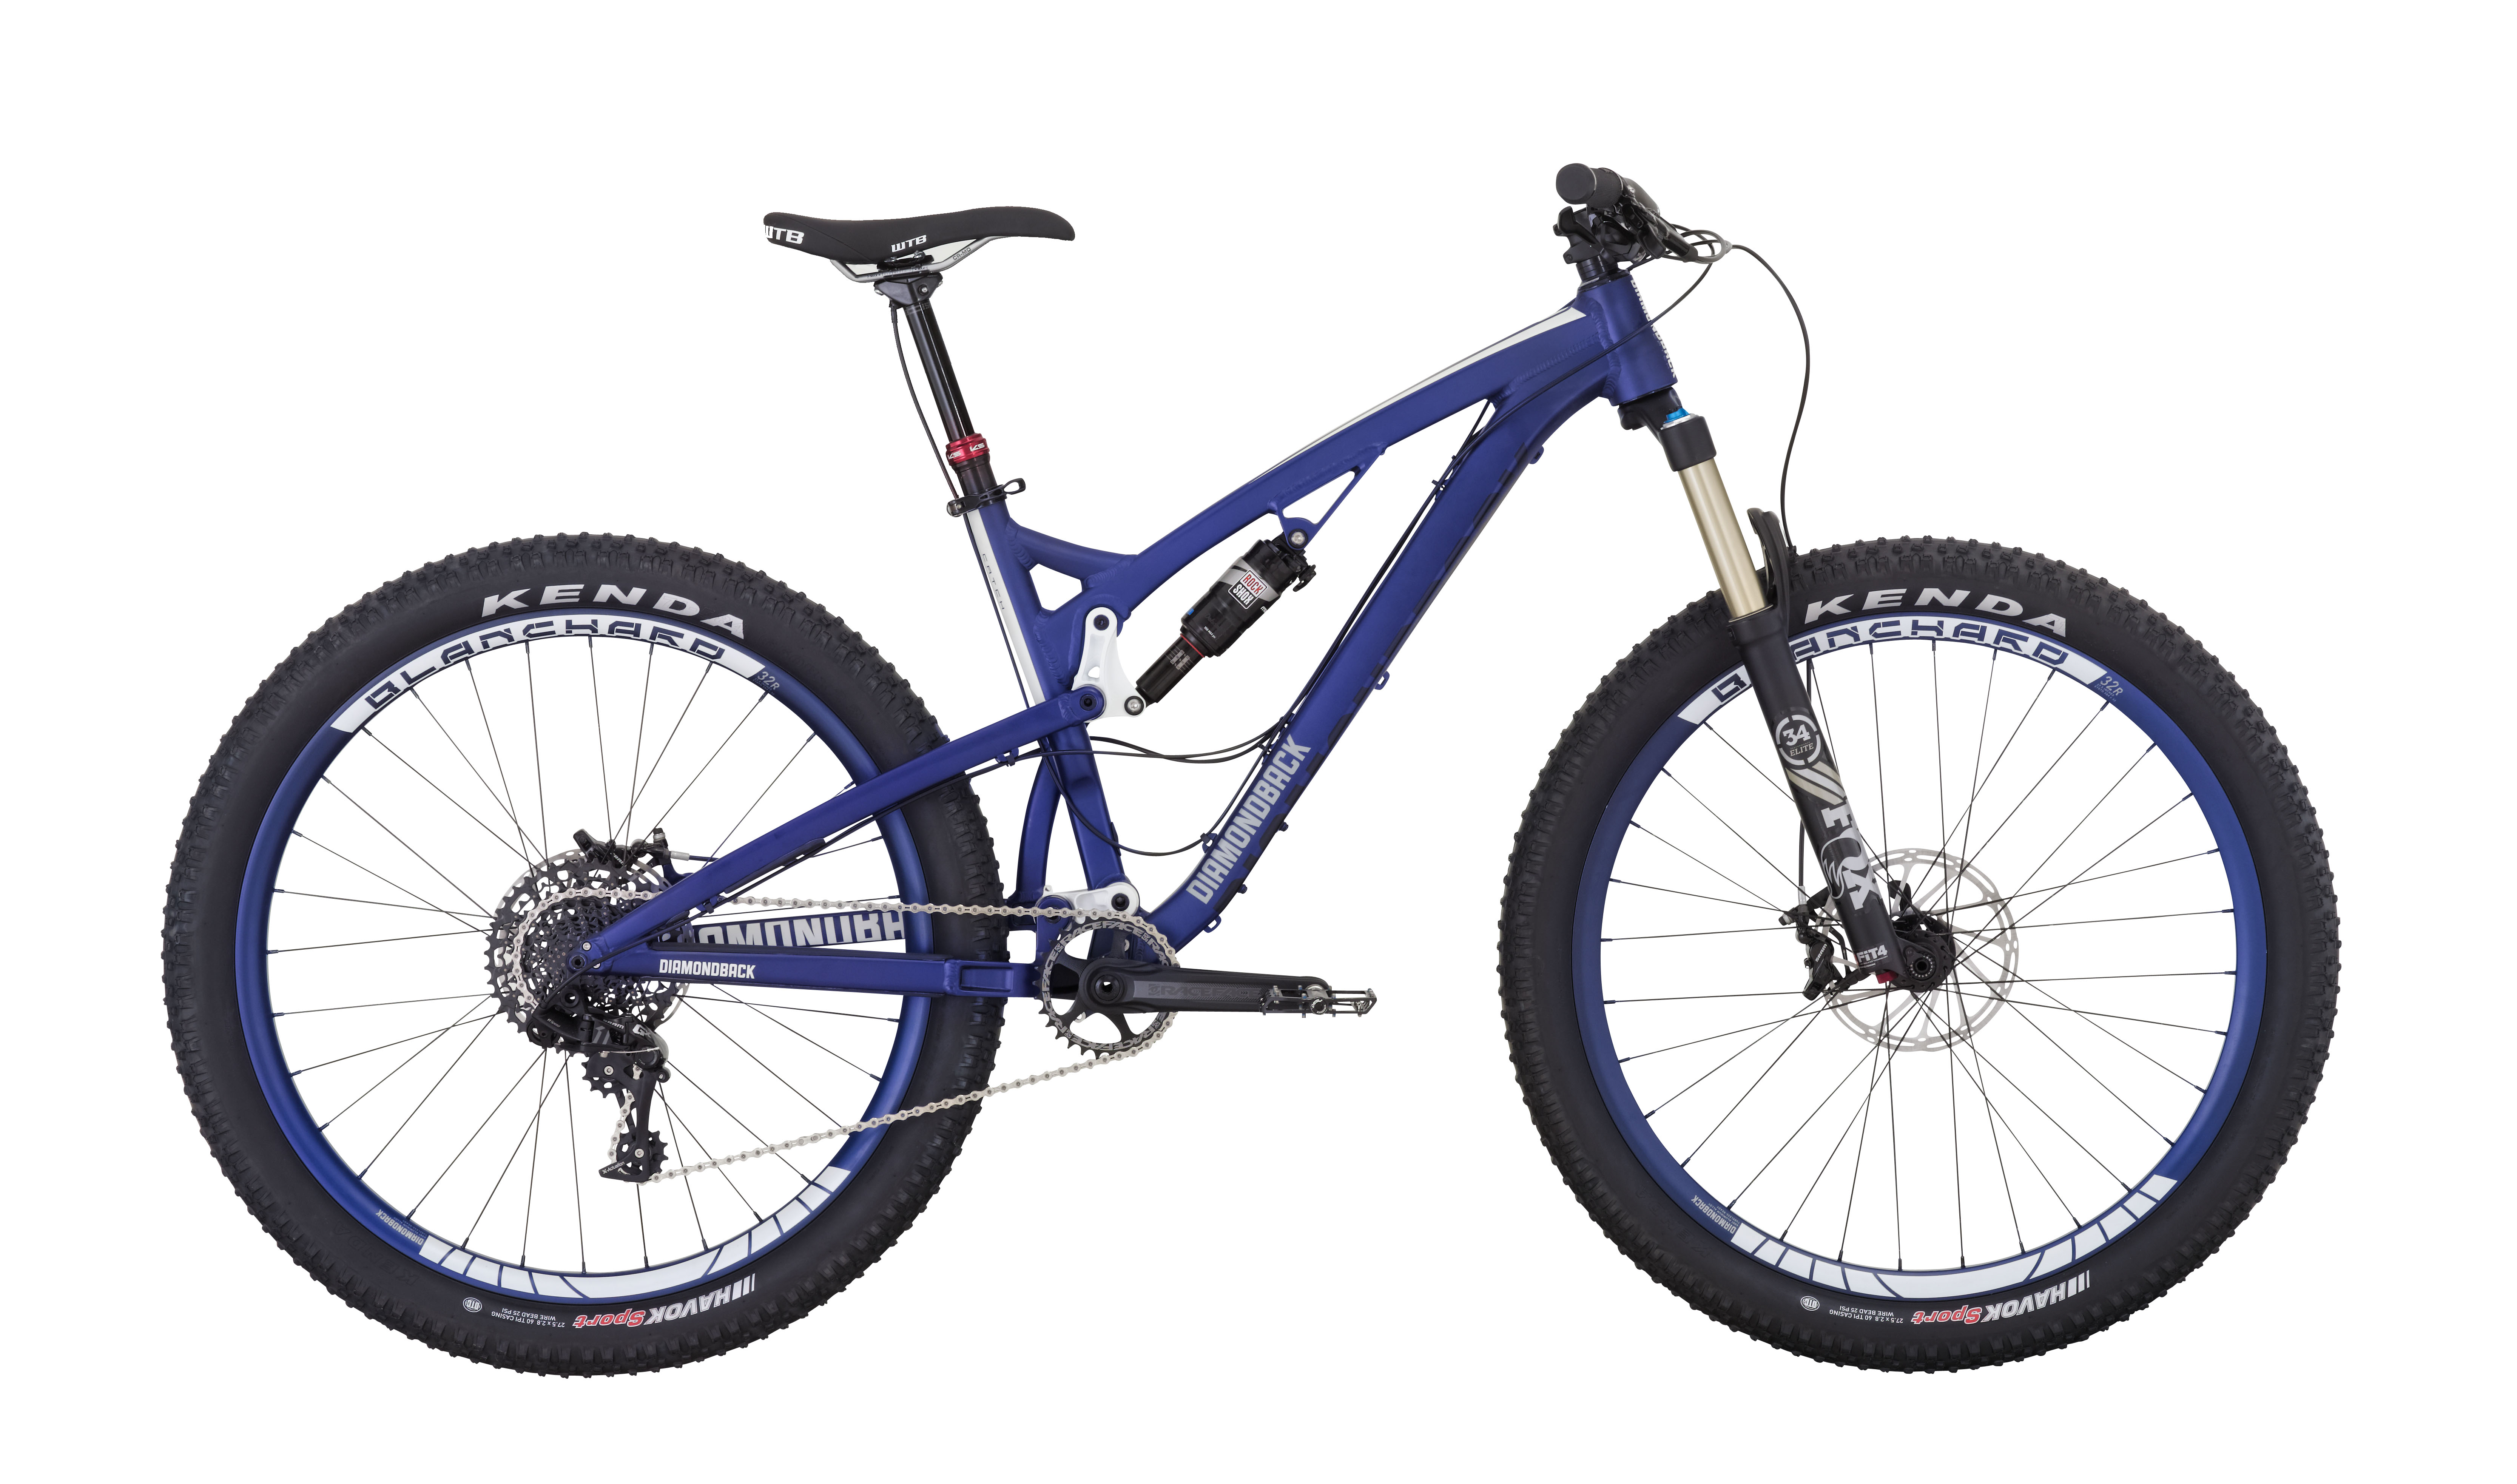 Diamondback launches new suspension system in 27.5 and 27.5-plus